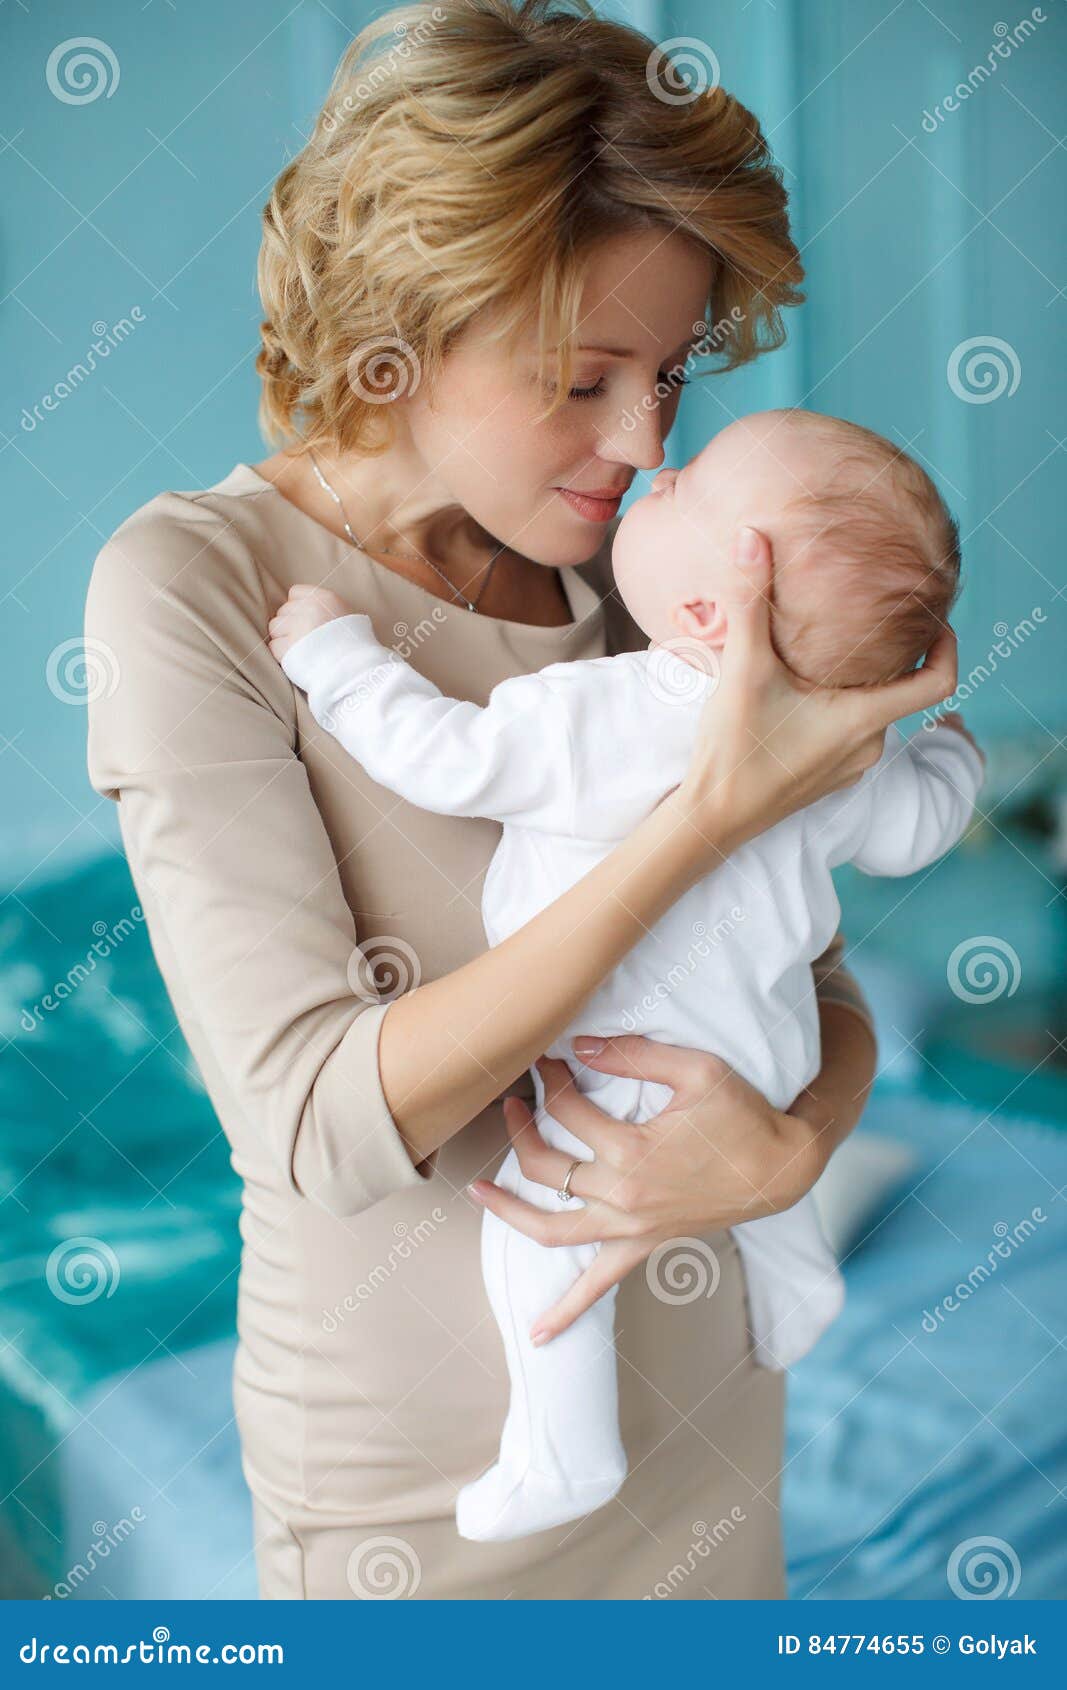 Mother Holding A Baby In Her Arms Stock Image - Image 